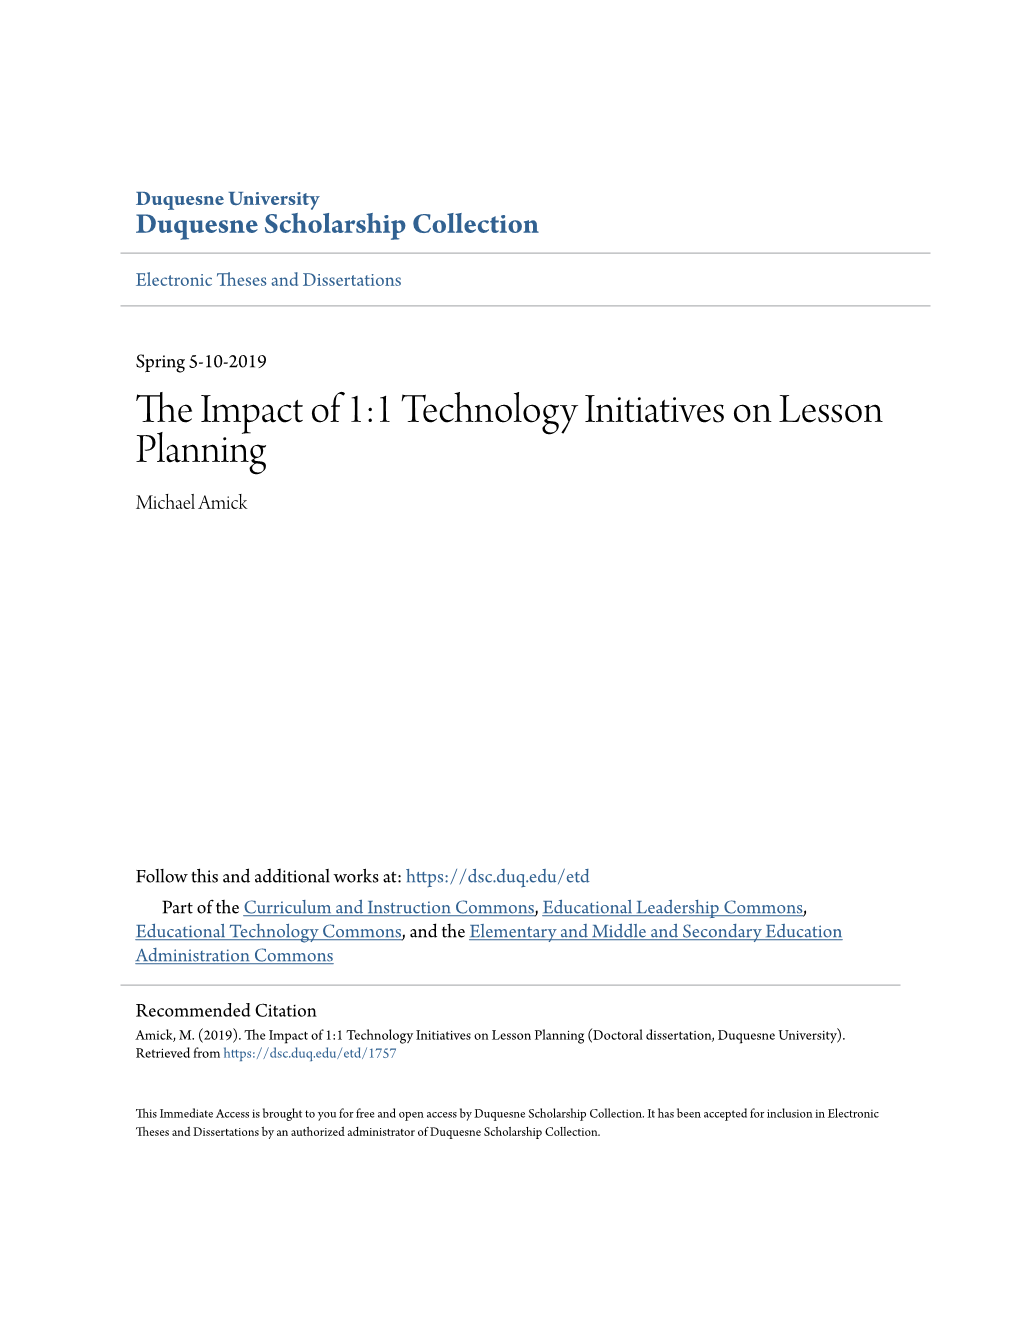 The Impact of 1:1 Technology Initiatives on Lesson Planning